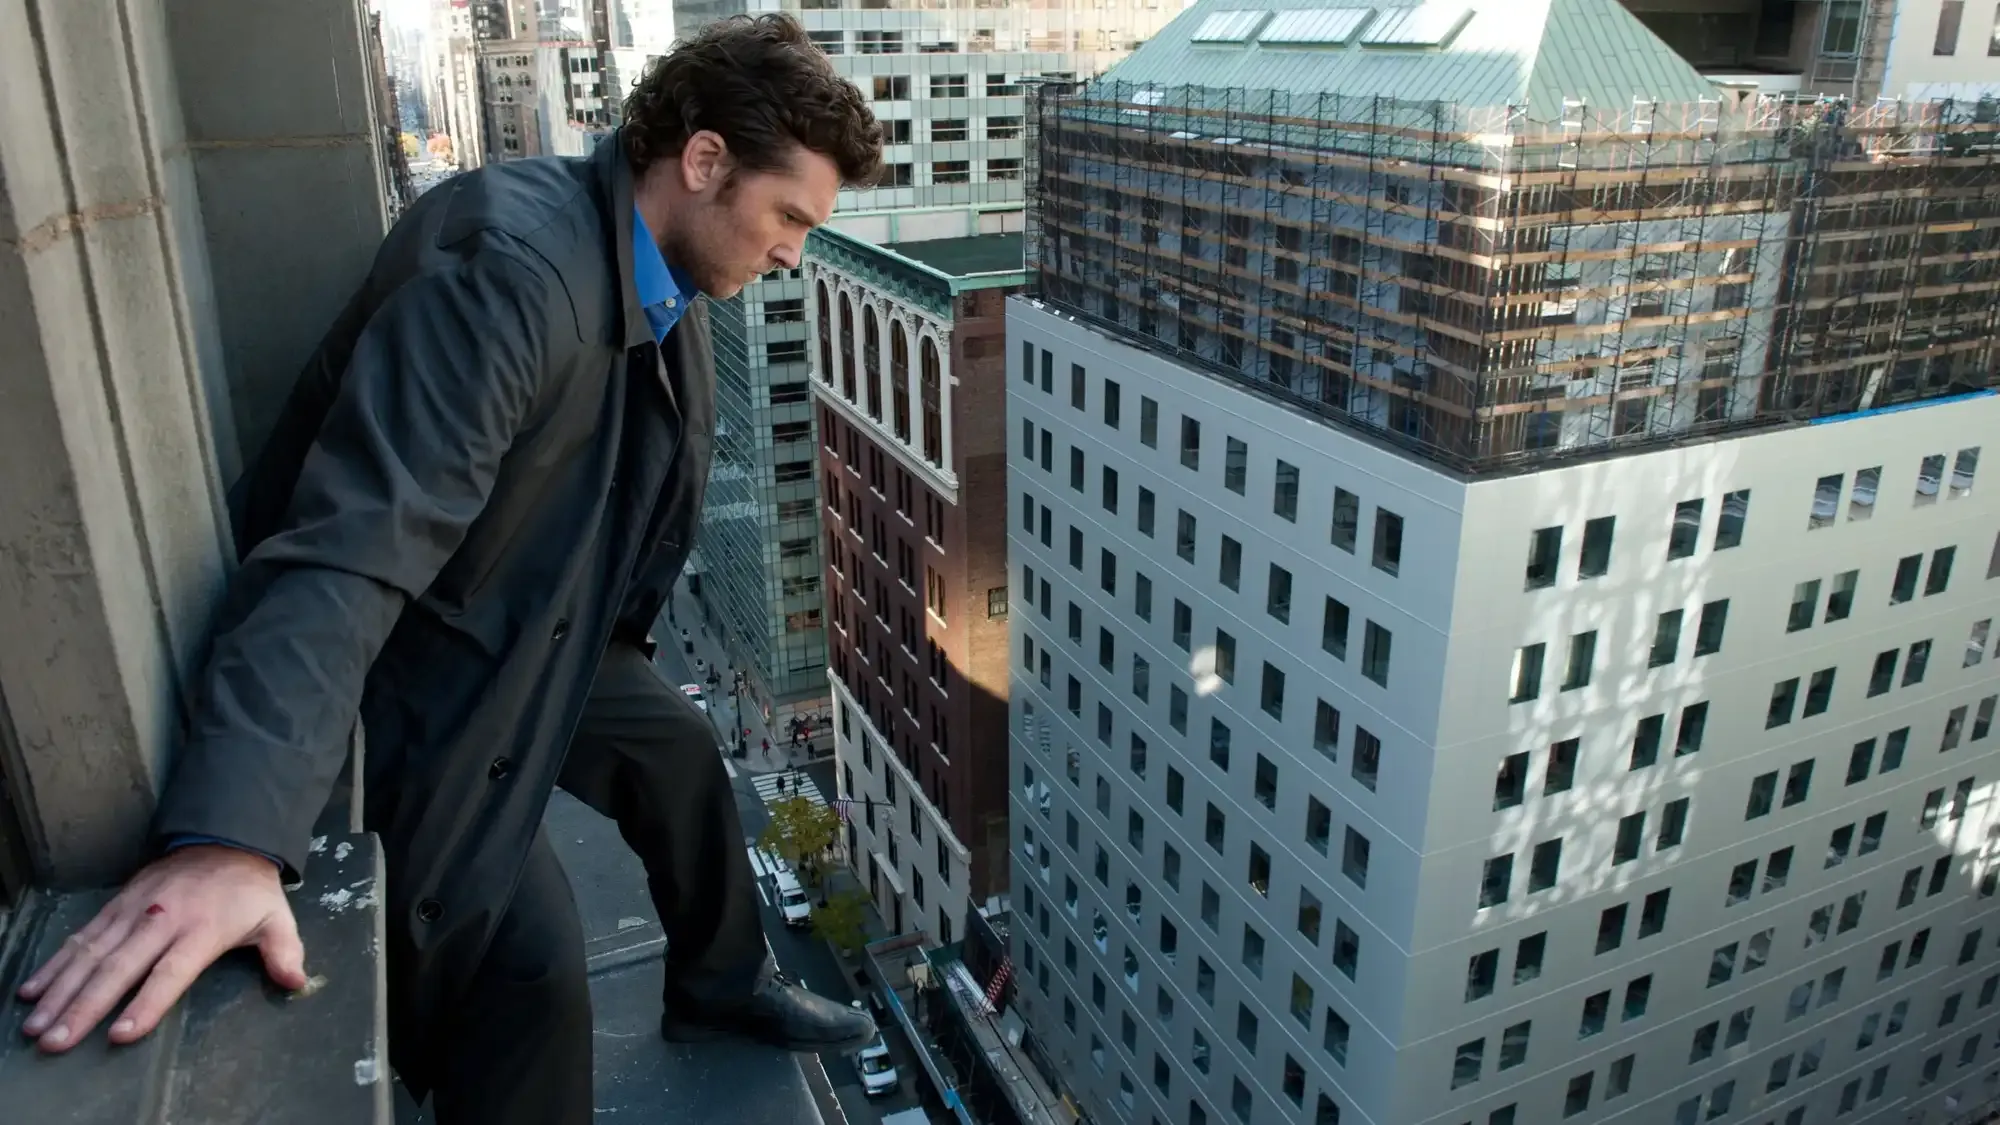 Man on a Ledge movie review